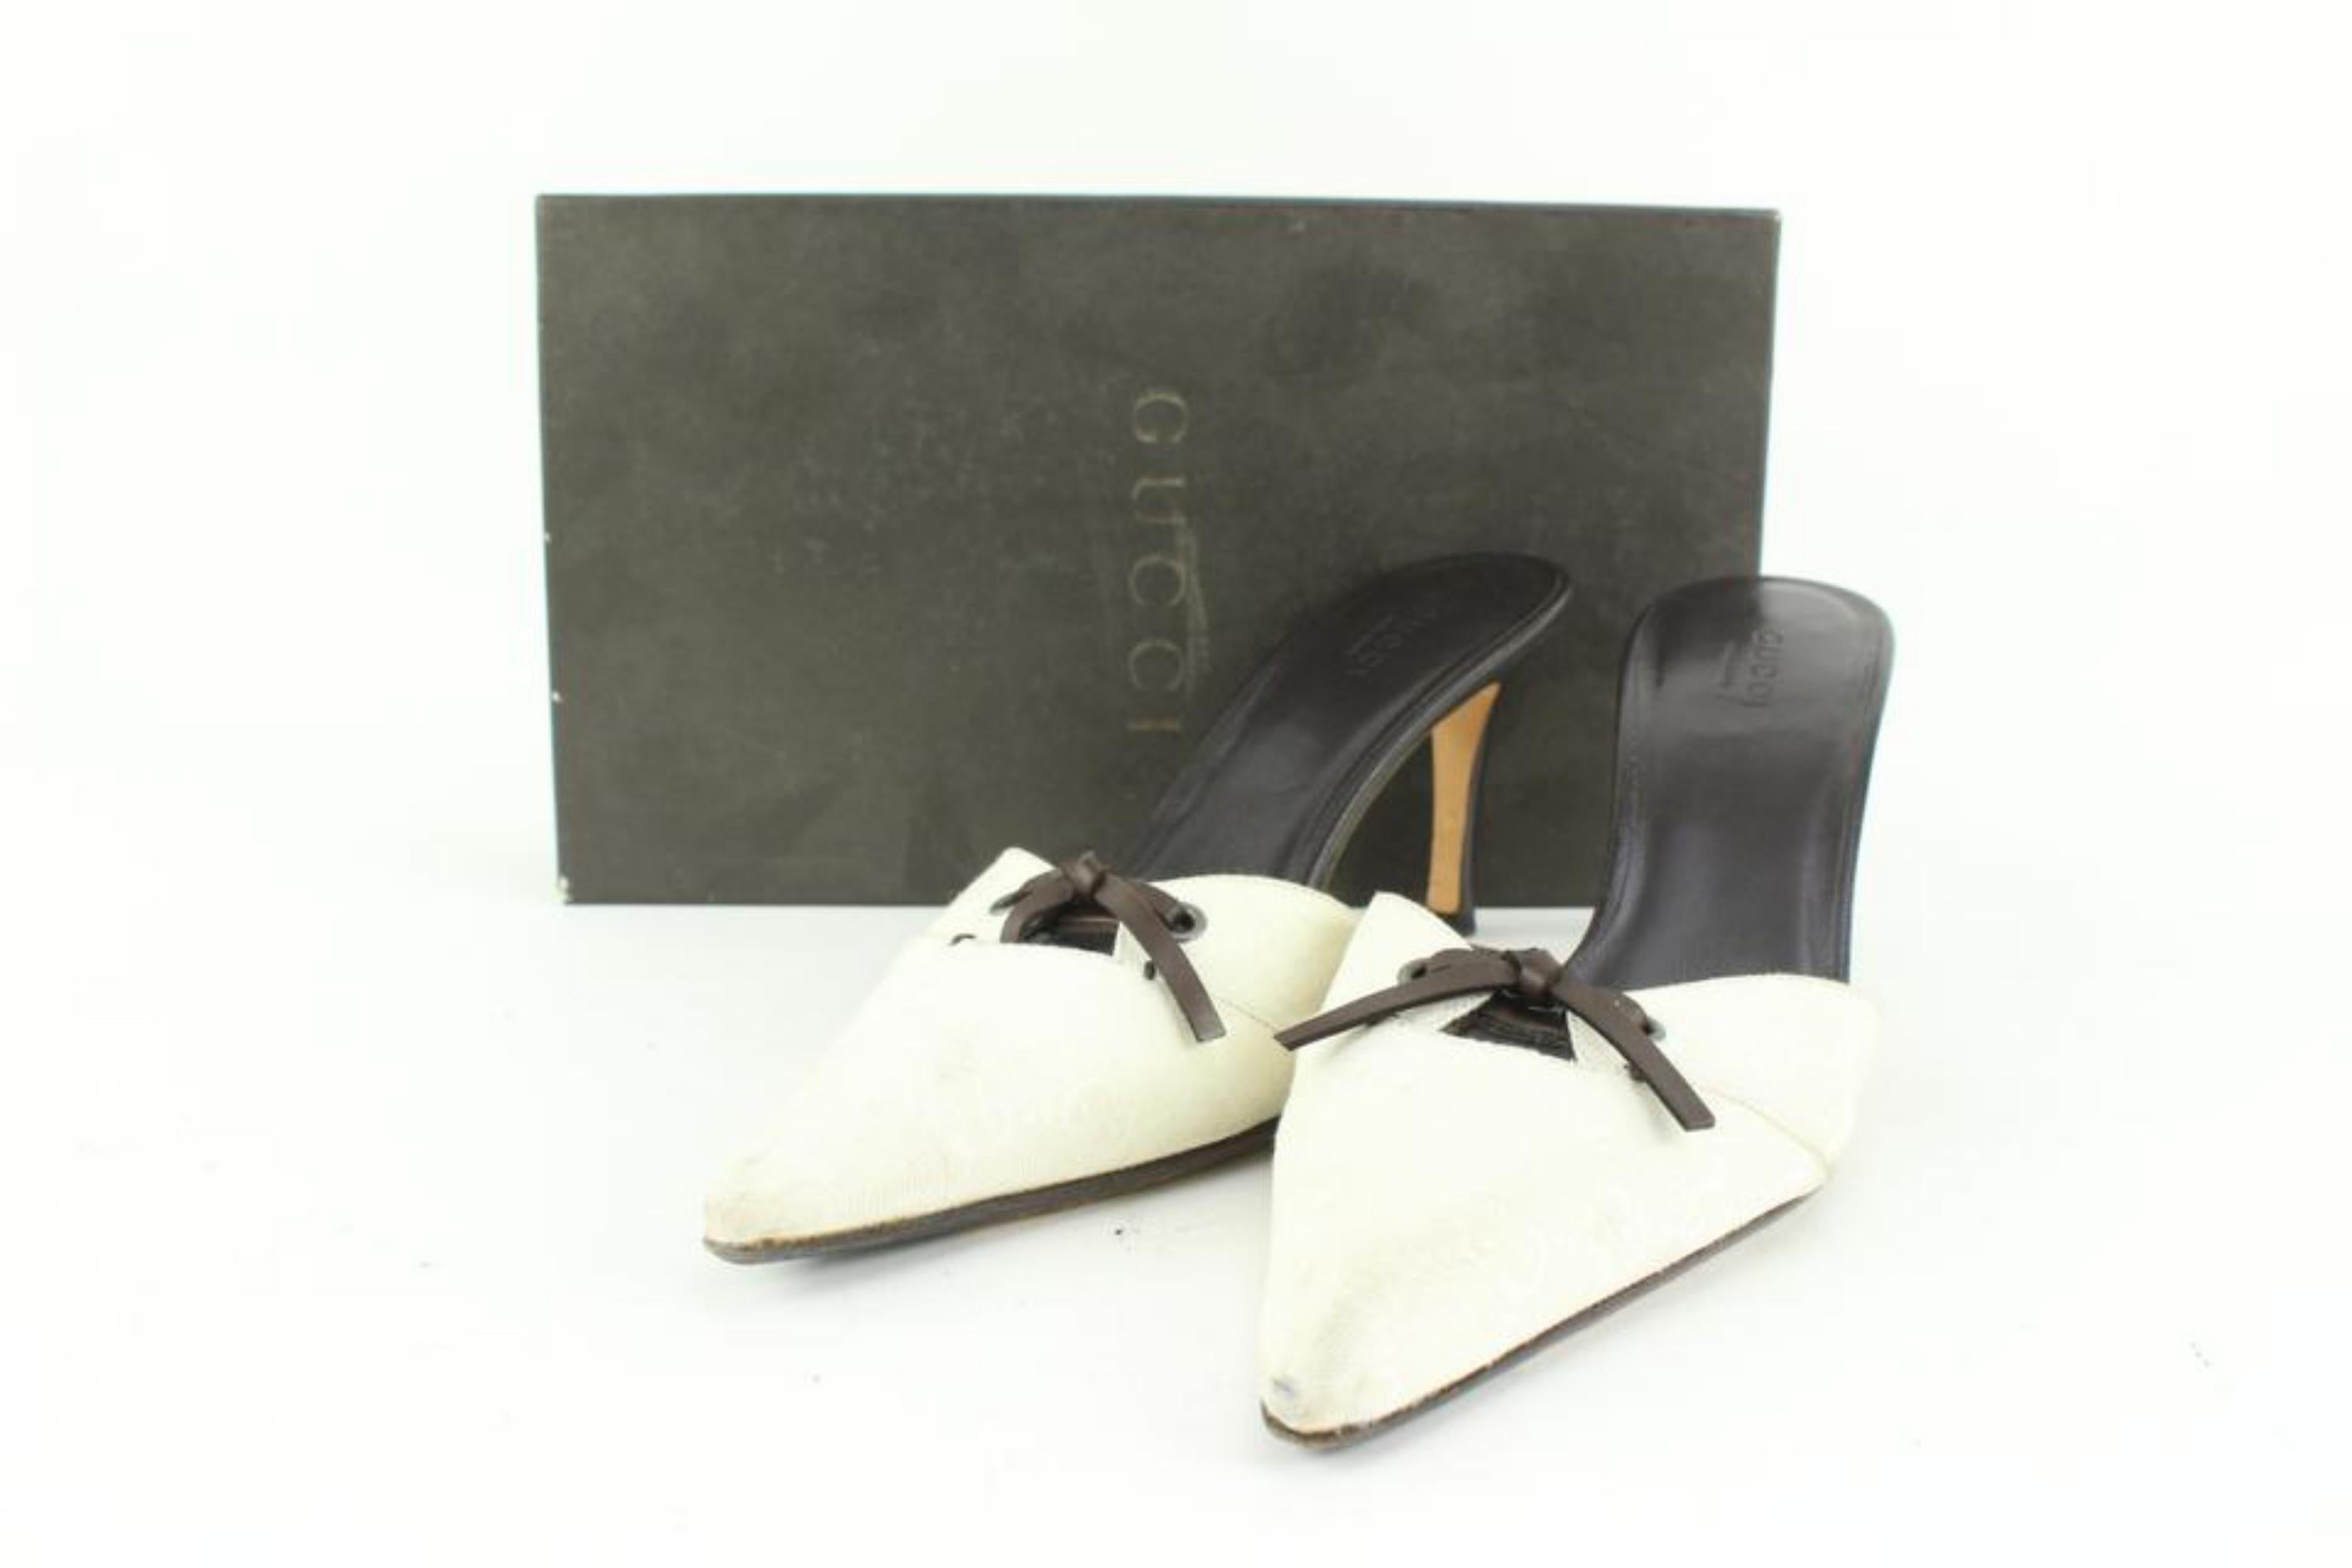 Gucci Size 8.5 White x Brown Mules Heels 110g58
Date Code/Serial Number: 106717
Made In: Italy
Measurements: Length:  11